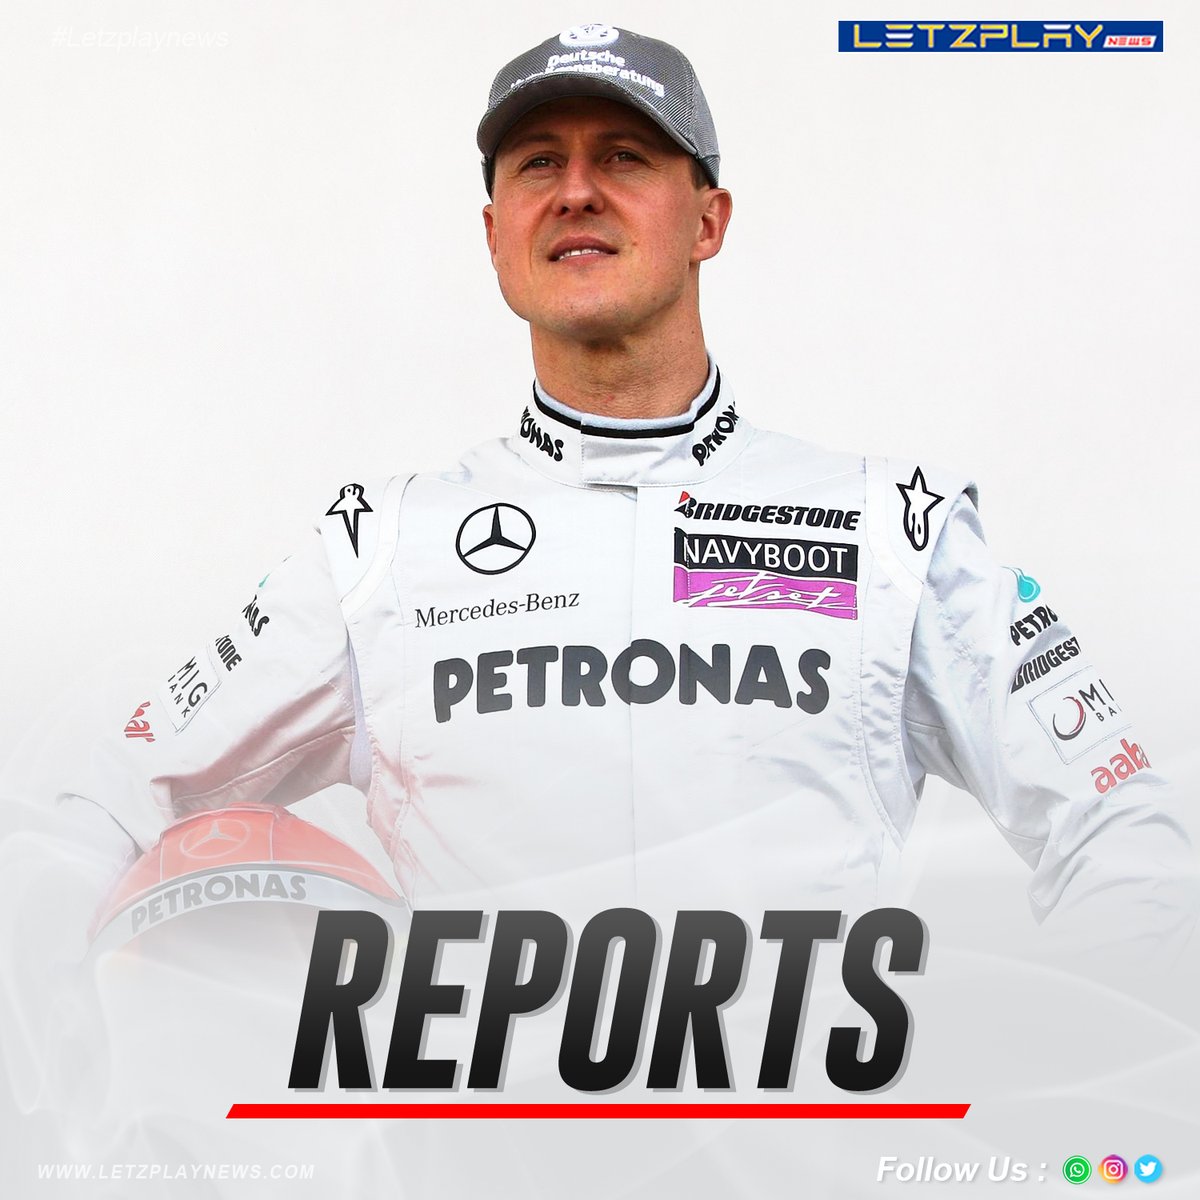 🚨| Michael Schumacher’s family wins a €200,000 legal battle against a German magazine for publishing an AI-generated fake interview last year! ⚖️
-
--
---
#F1 #racing #racingdriver #news #case #trendingnow #MichaelSchumacher #JusticeServed #LegalVictory #Formula1